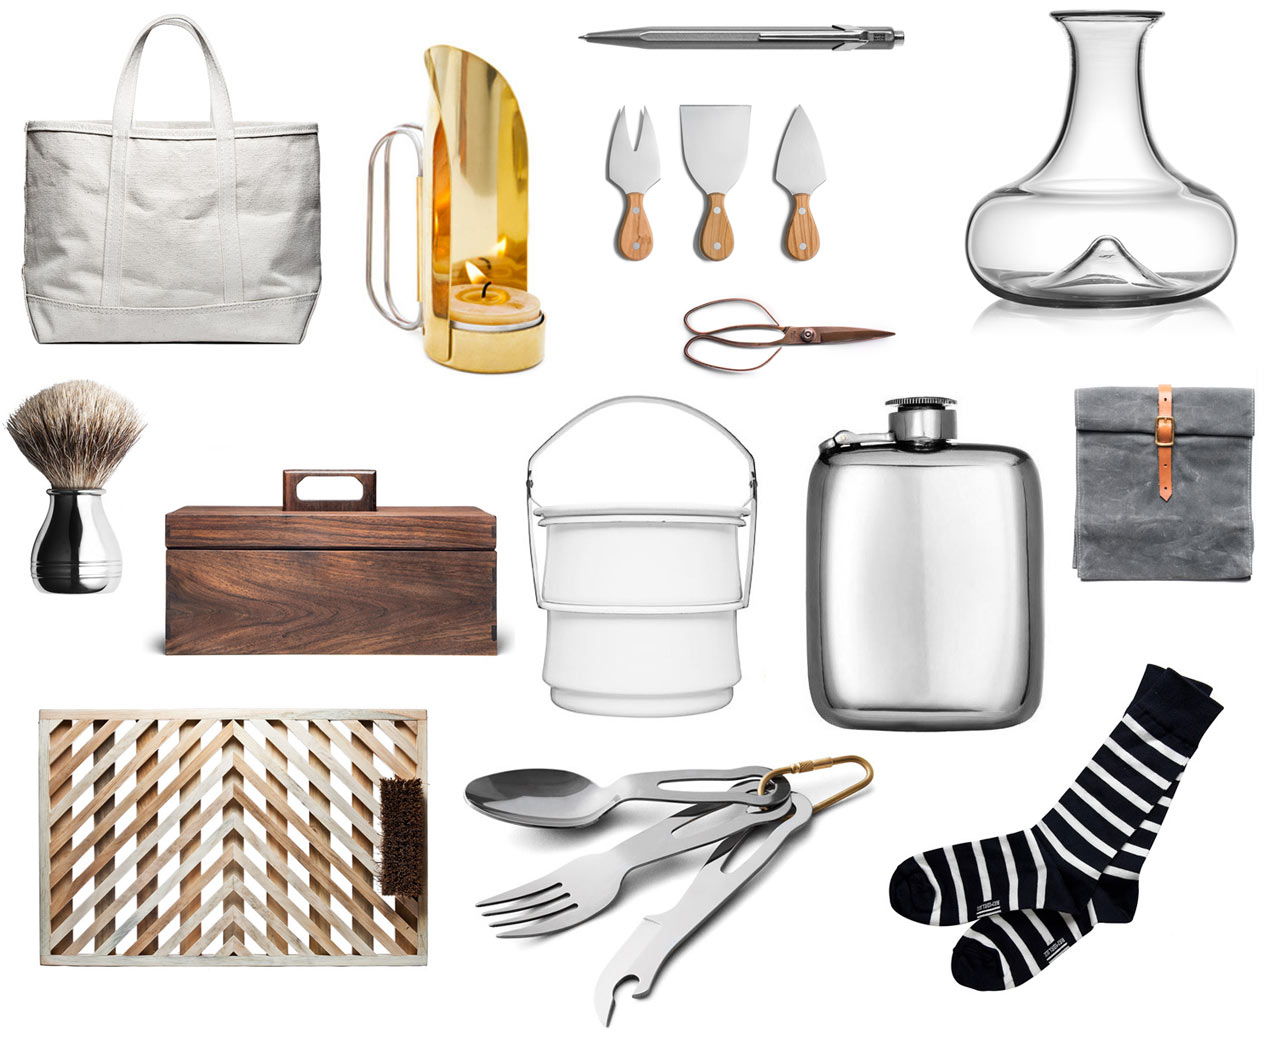 Win A $250 Gift Card For Well-Designed Everyday Goods from Kaufmann Mercantile